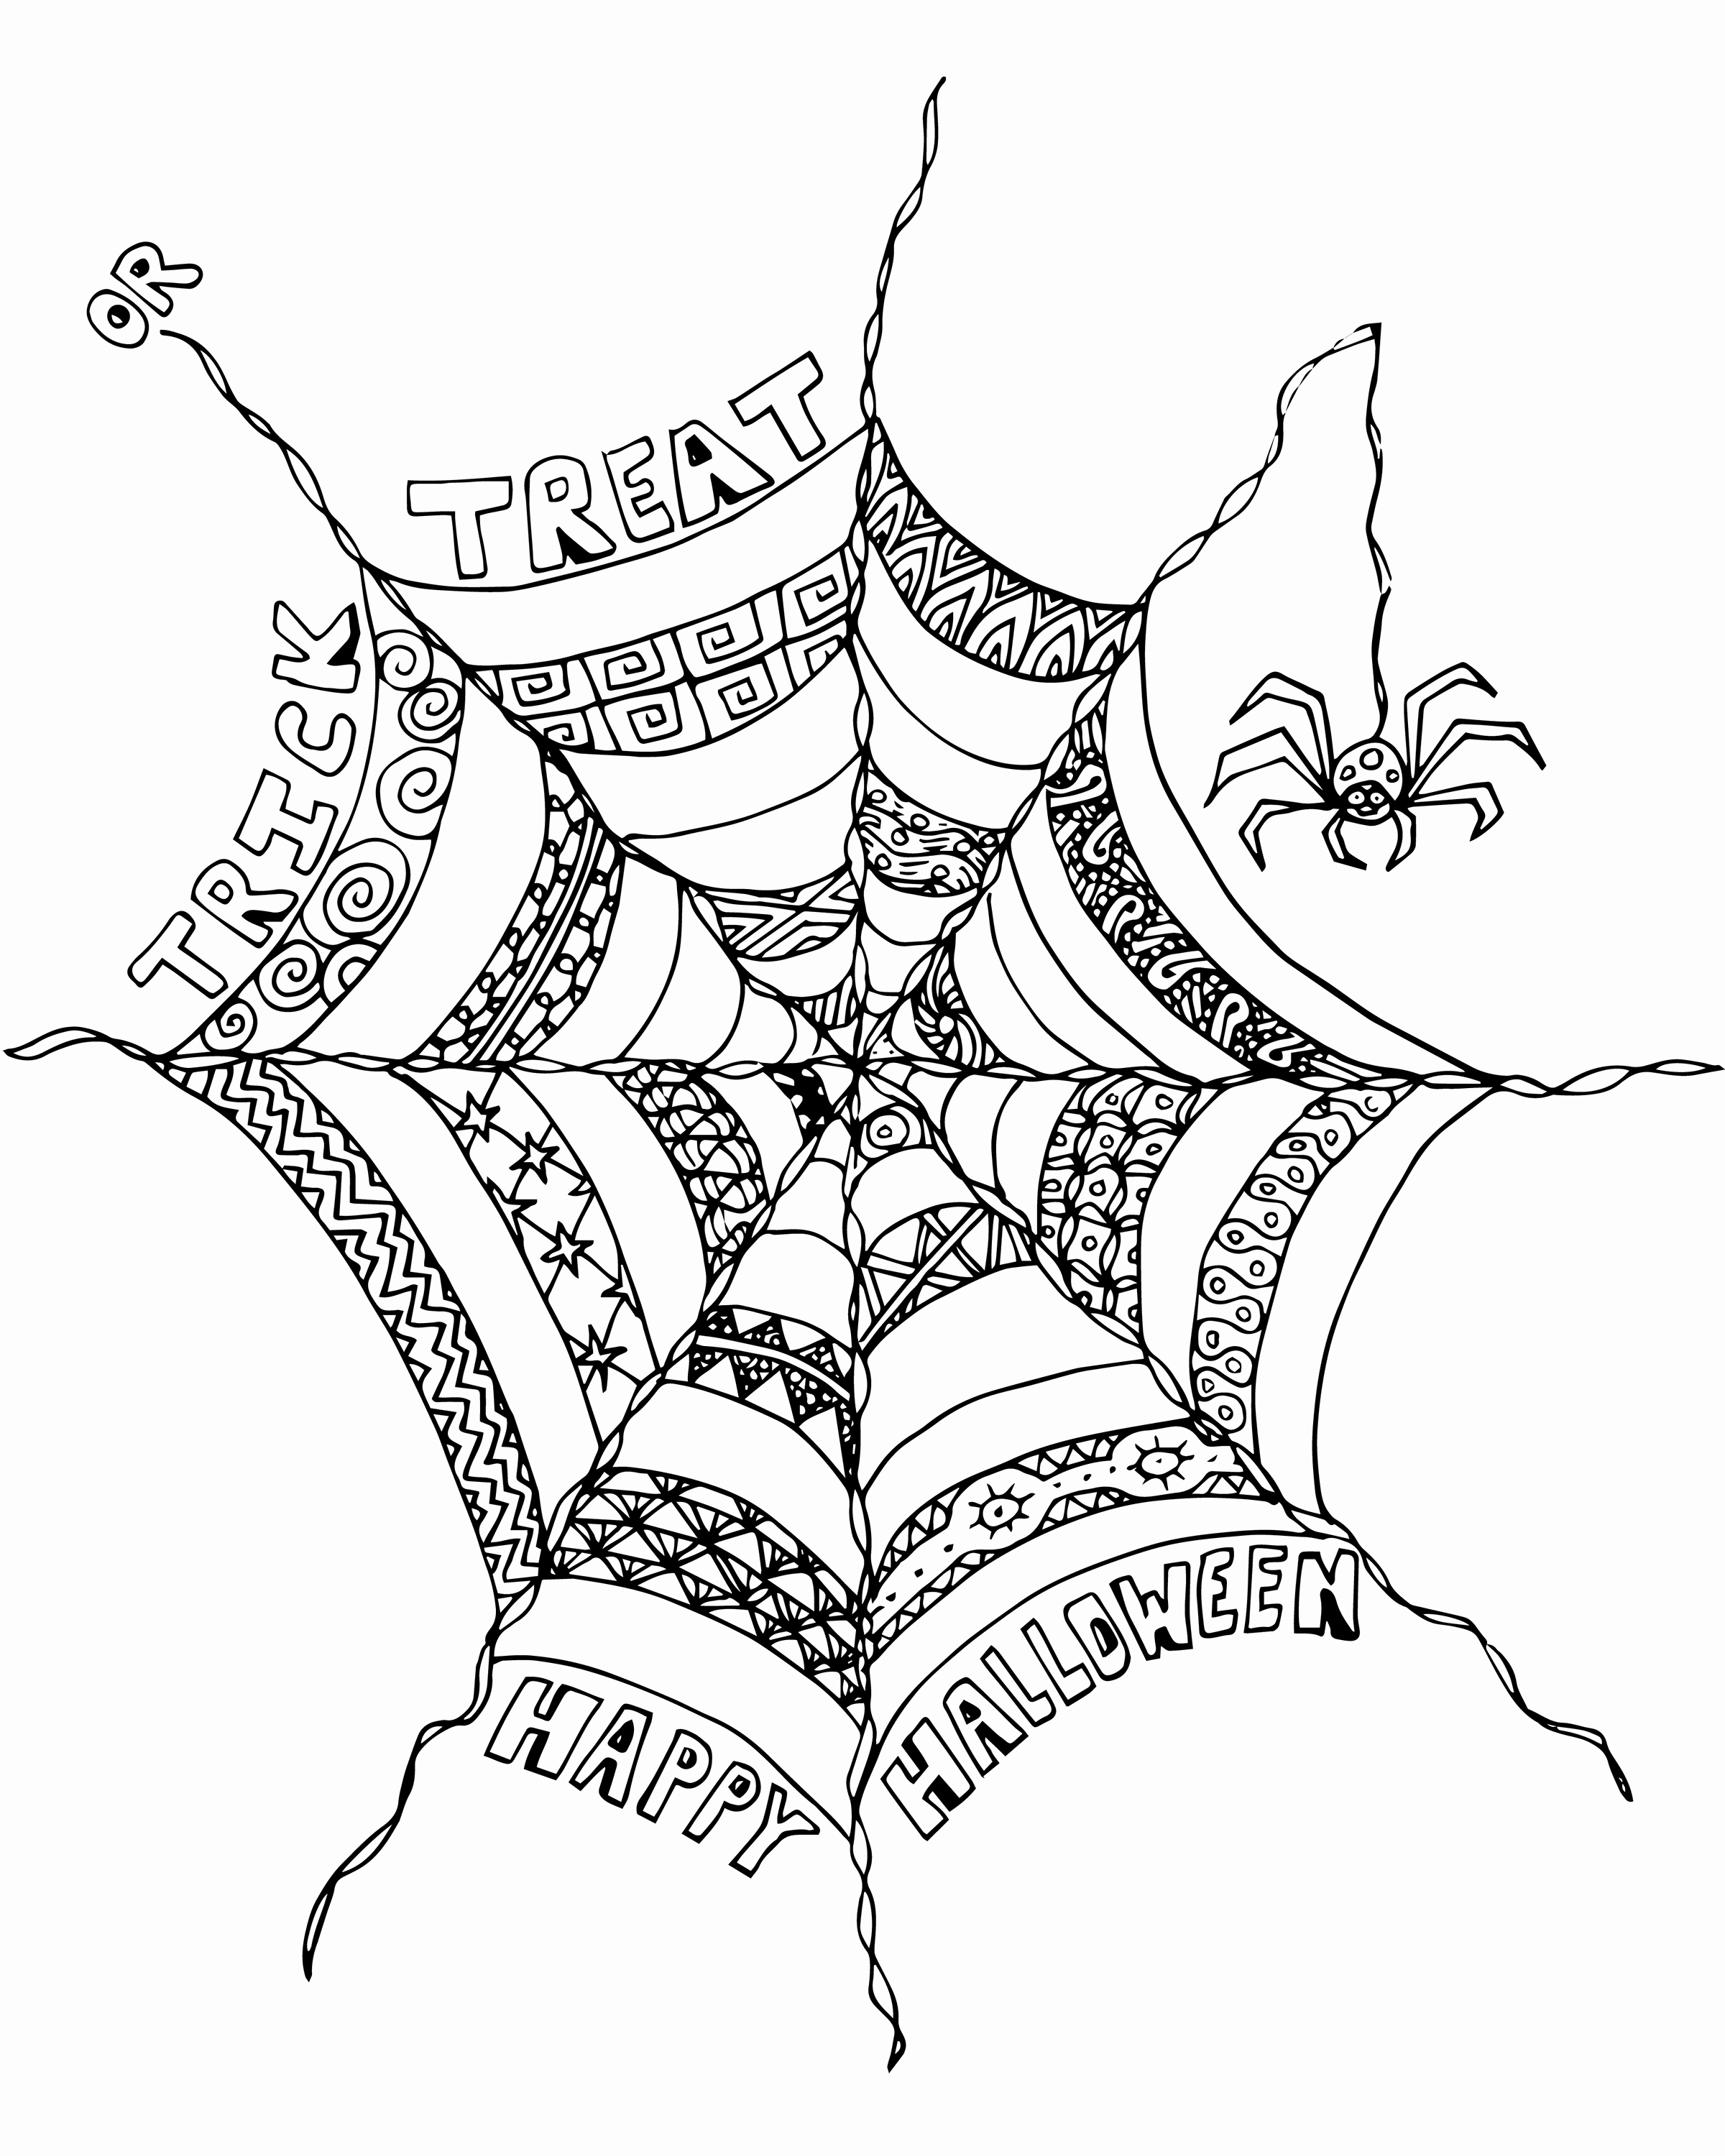 Scary Halloween Coloring Pages For Adults at Free